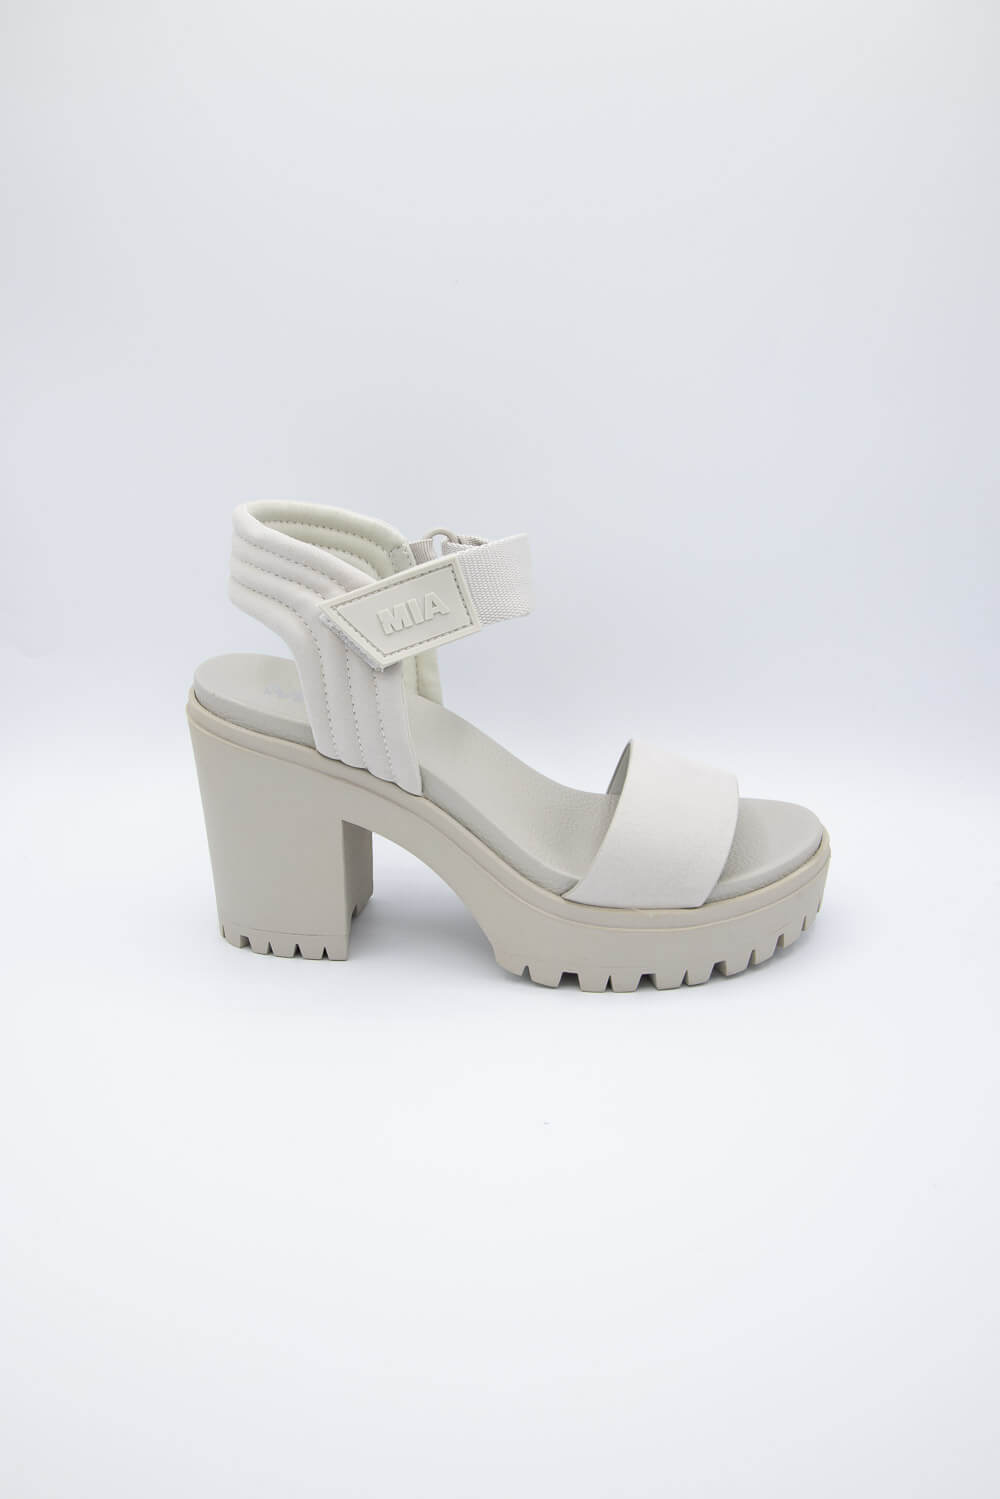 LAL SHOES & BAGS Twelve Women's Heeled Shoes with Stone Back Zipper-white -  Trendyol